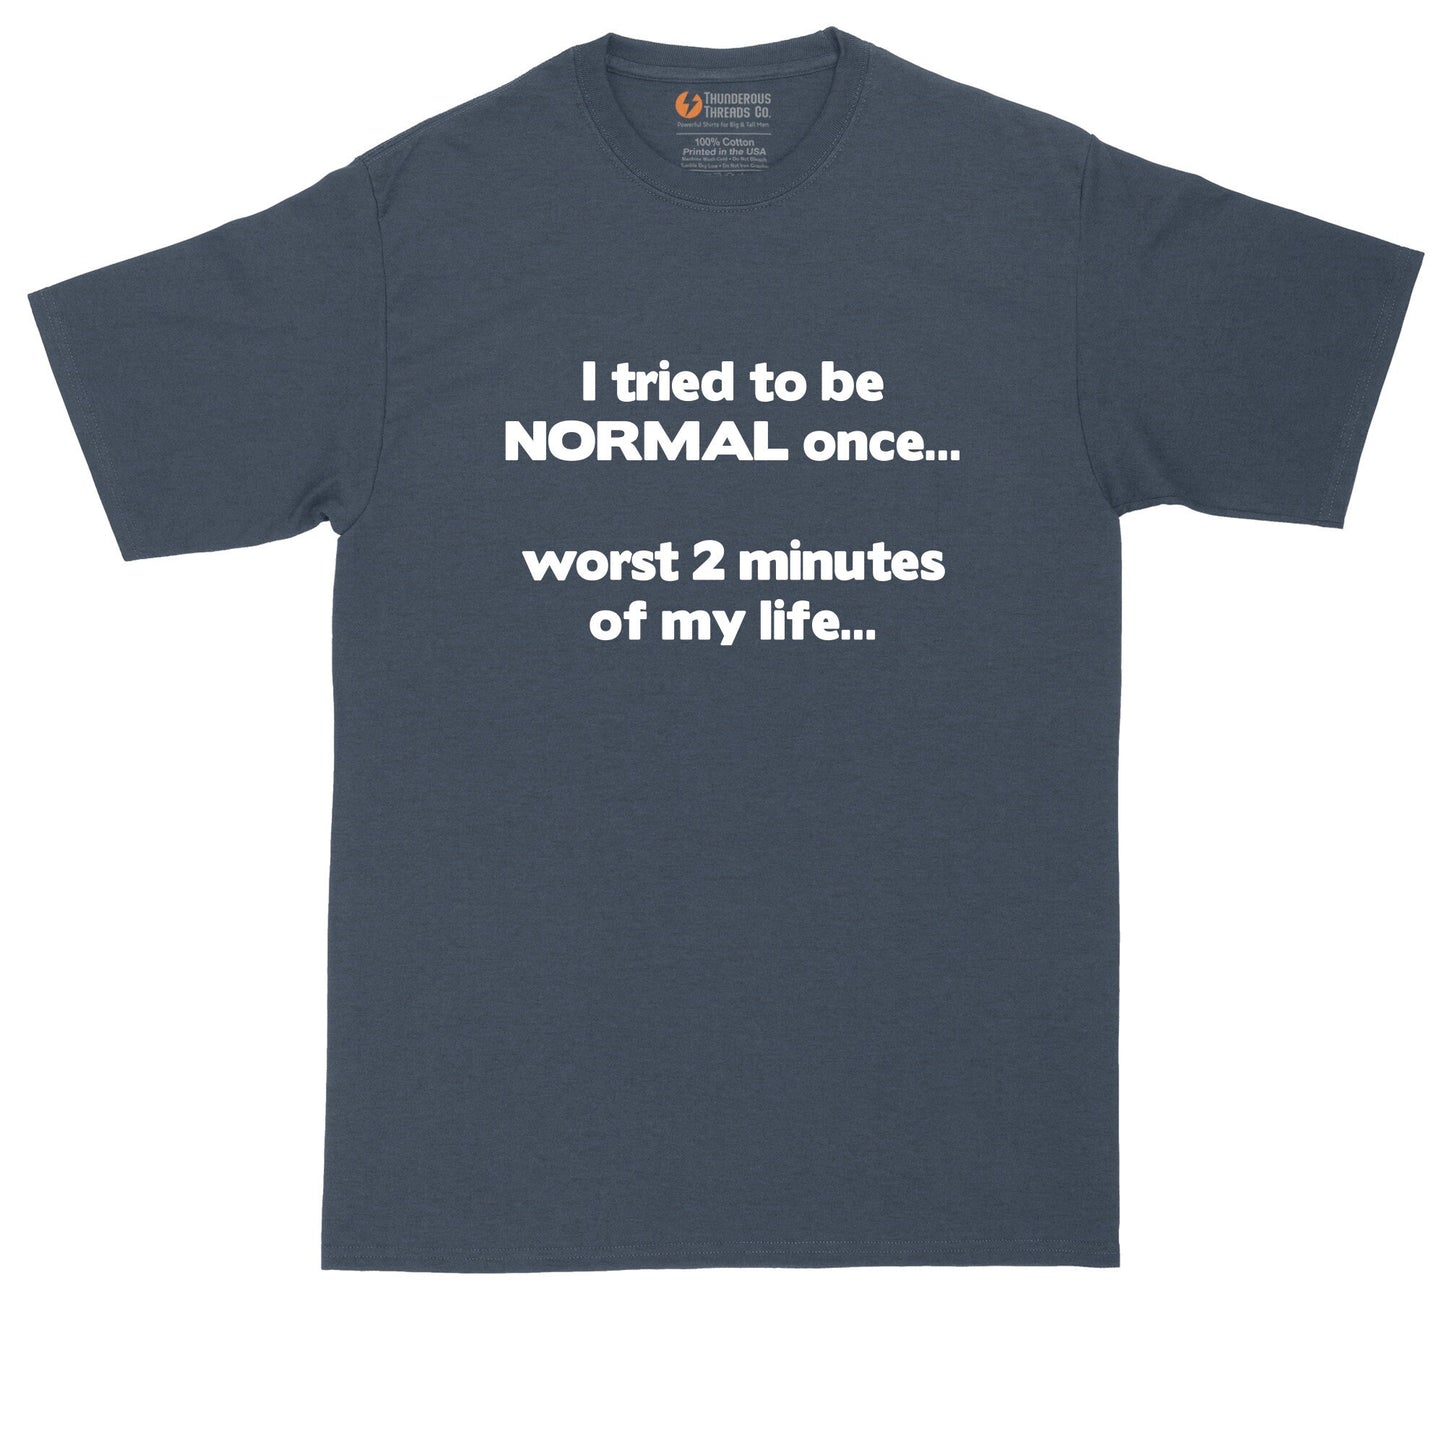 I Tried to Be Normal Once - Worst Two Minutes of My Life | Big and Tall Mens T-Shirt | Funny T-Shirt | Graphic T-Shirt